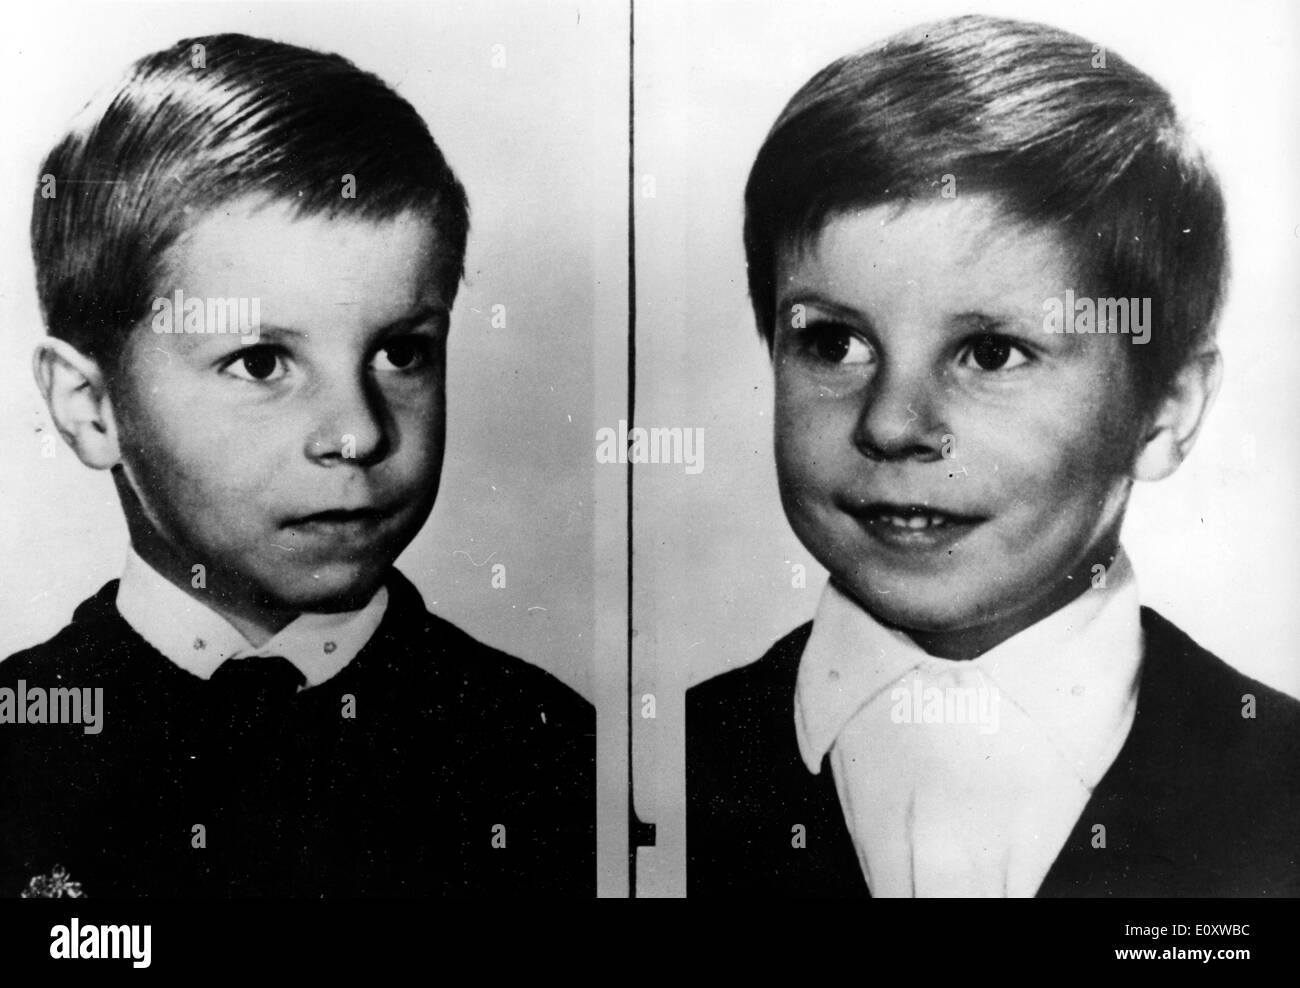 Dec 05, 1967; Paris, FRANCE; A full scale hunt is going for 7 yr. old Emmanuel Malliart kidnapped while on the way home from Stock Photo